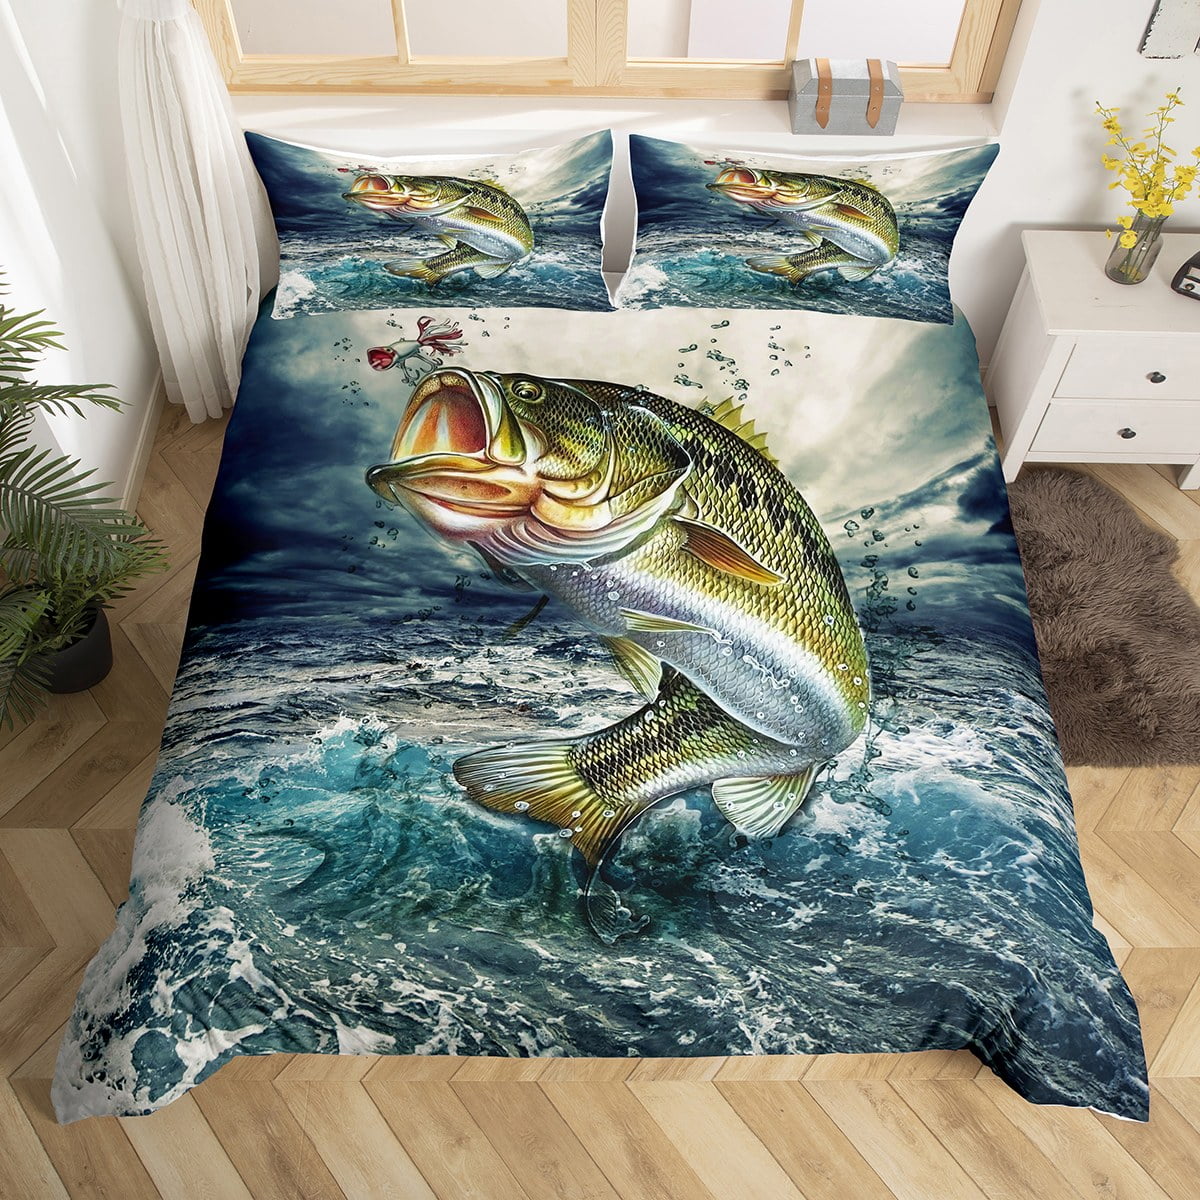 YST Bass Big Fish Comforter Cover Queen Size,Pike Big Fish